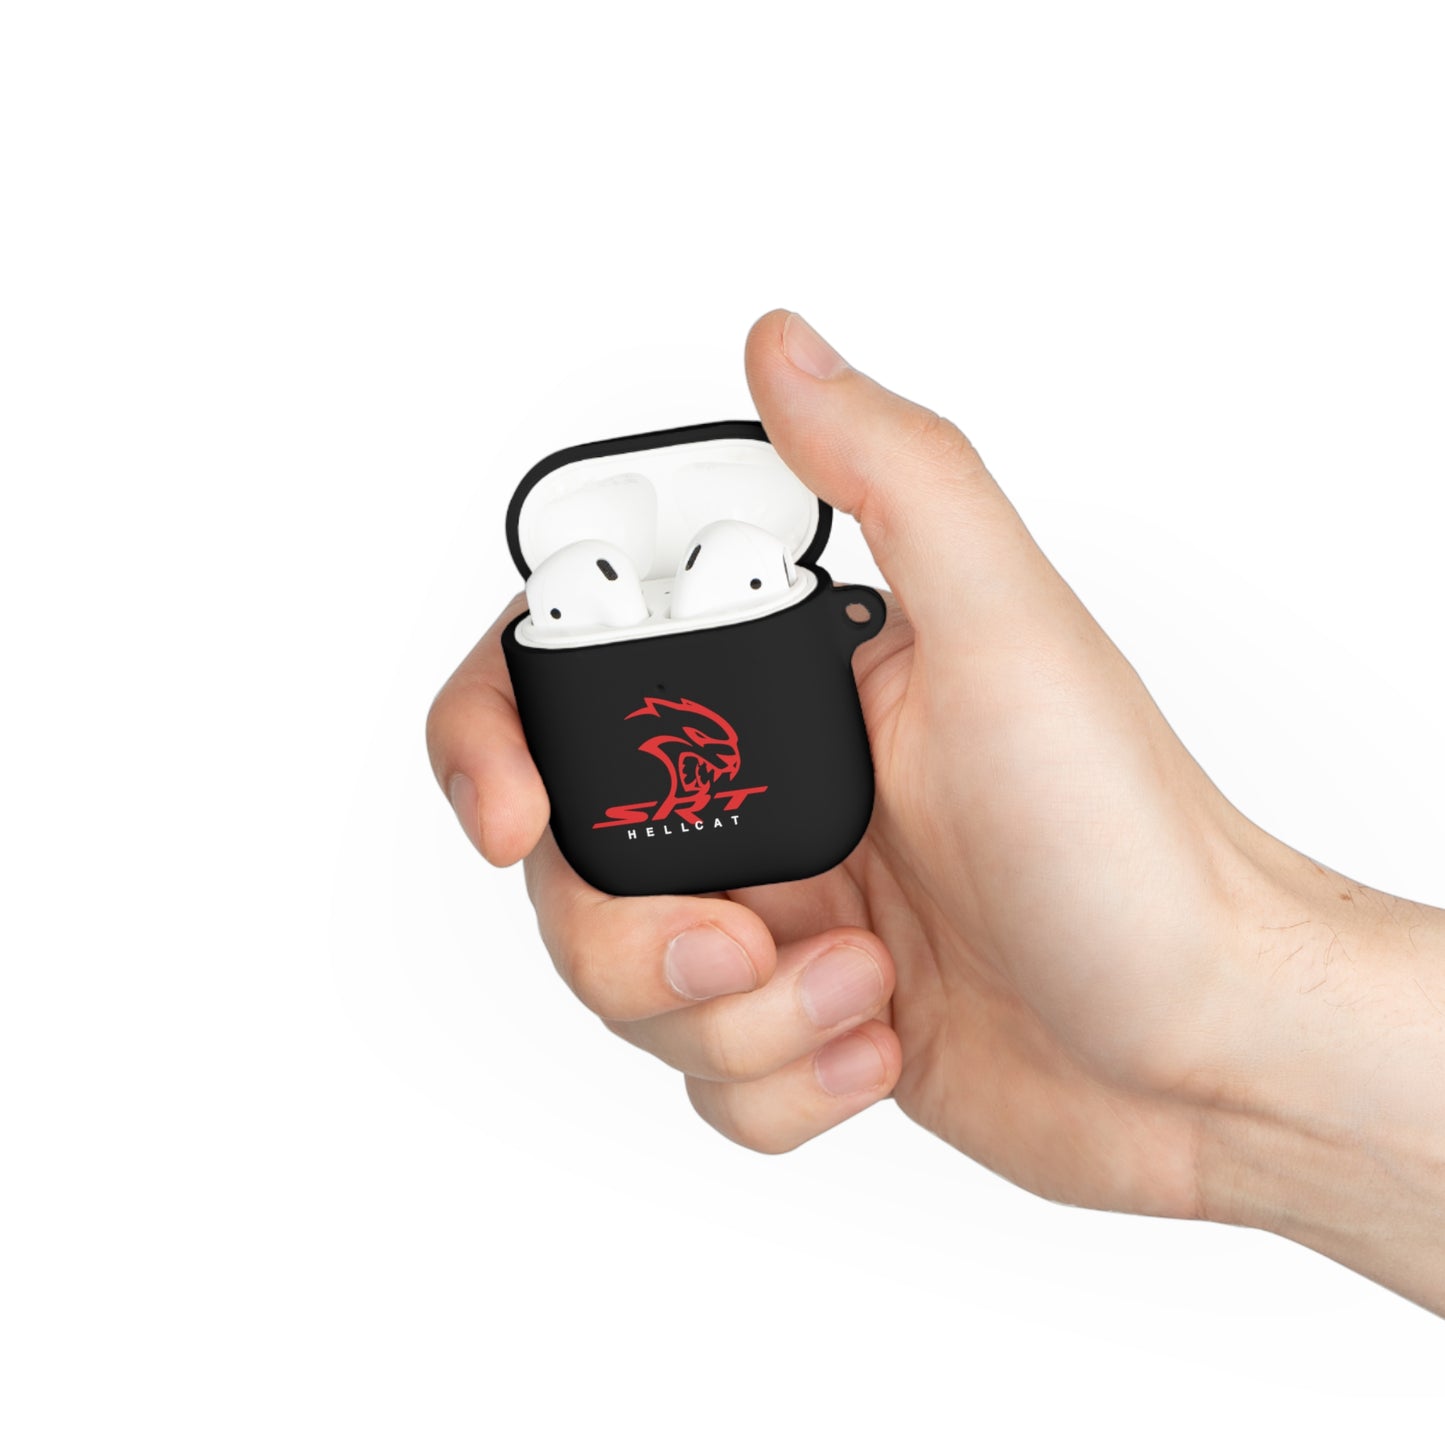 SRT Hellcat Silhouette Edition: Premium AirPods Case for Style and Protection